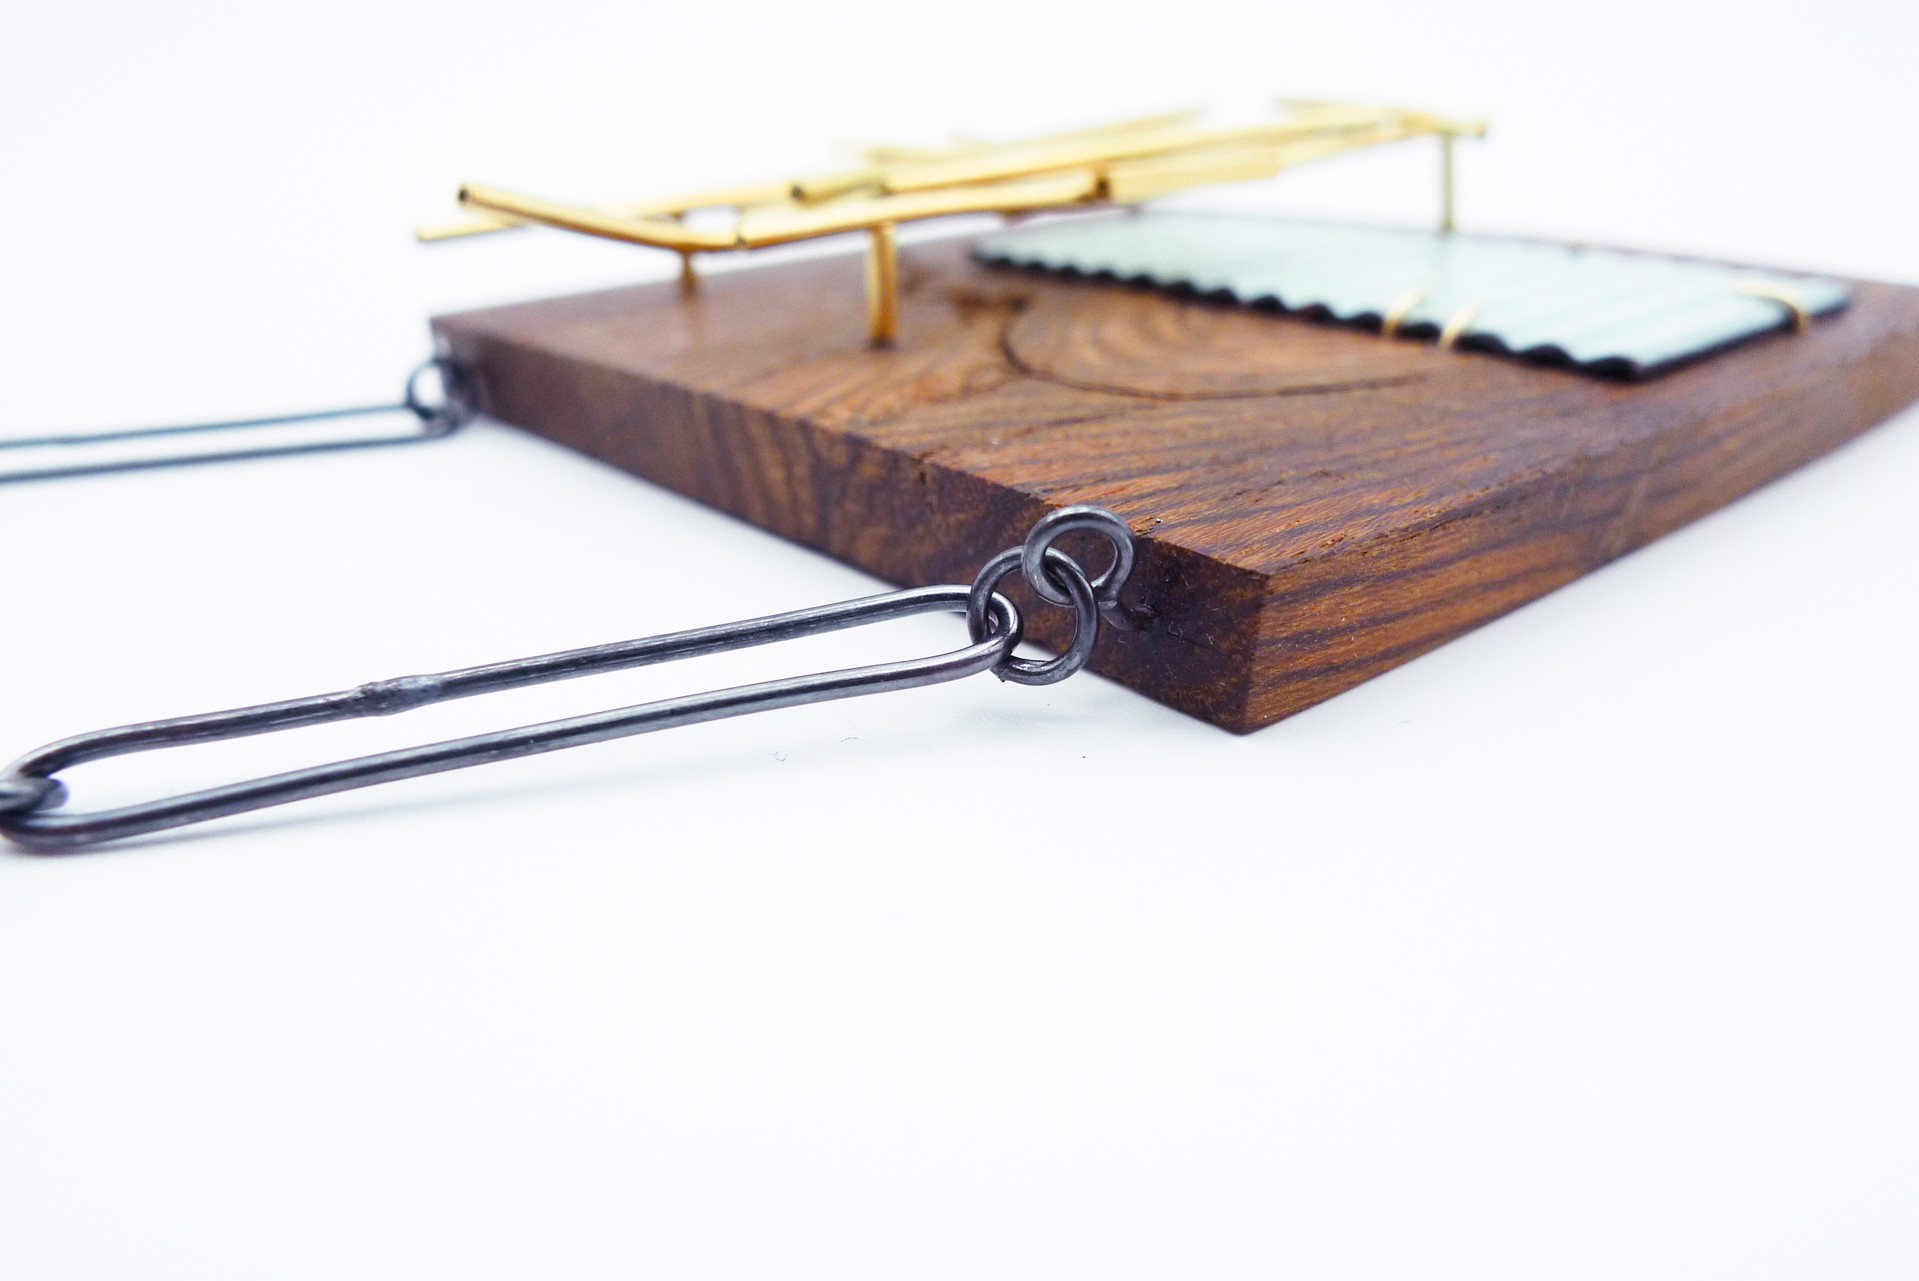 Bamboo Scaffold Necklace by Lauren Markley